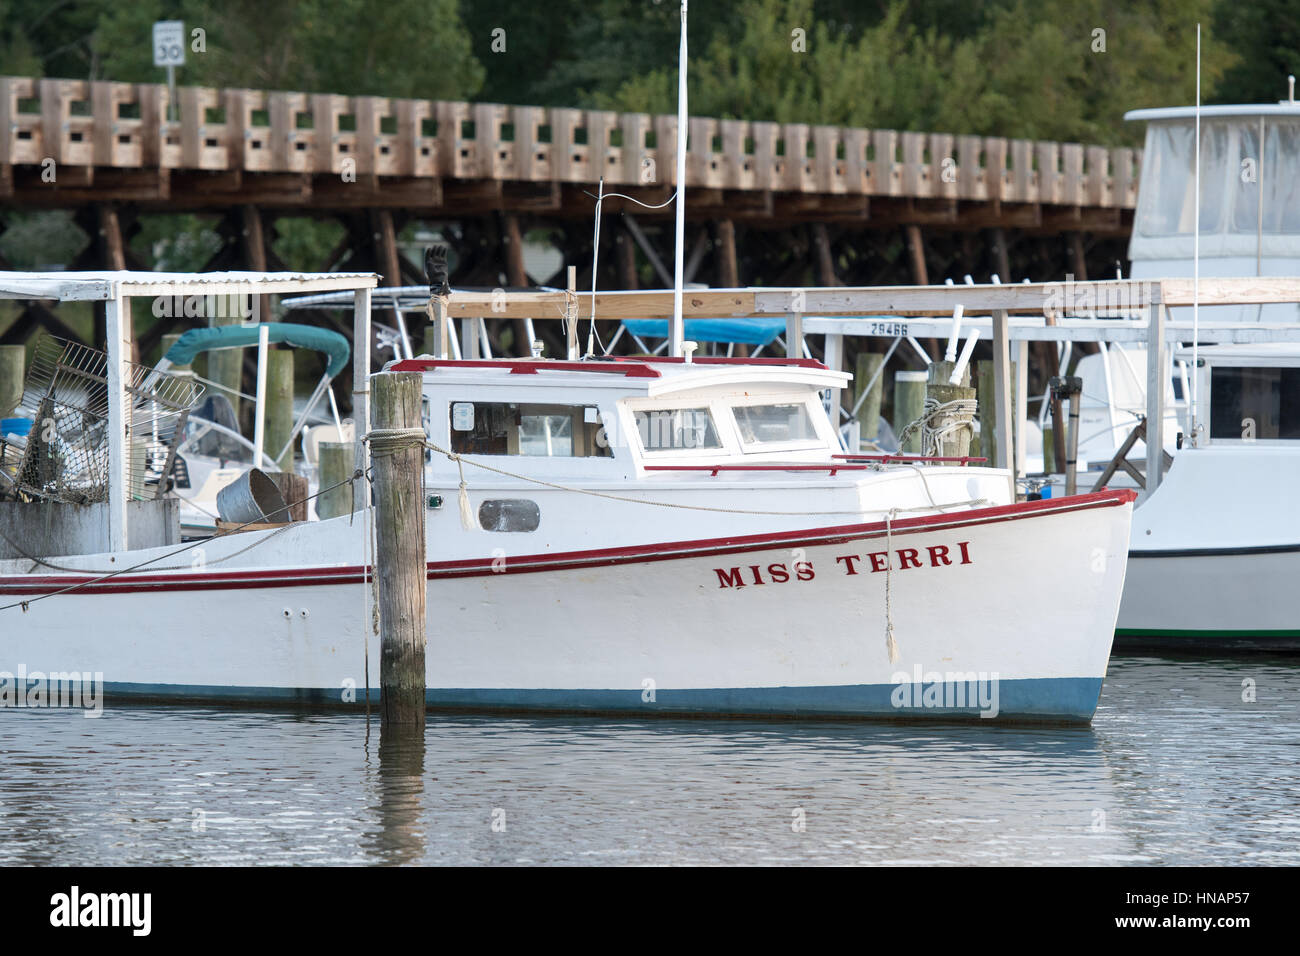 A boat is docked near the Suicide Bridge in Secretary, Maryland. Stock Photo